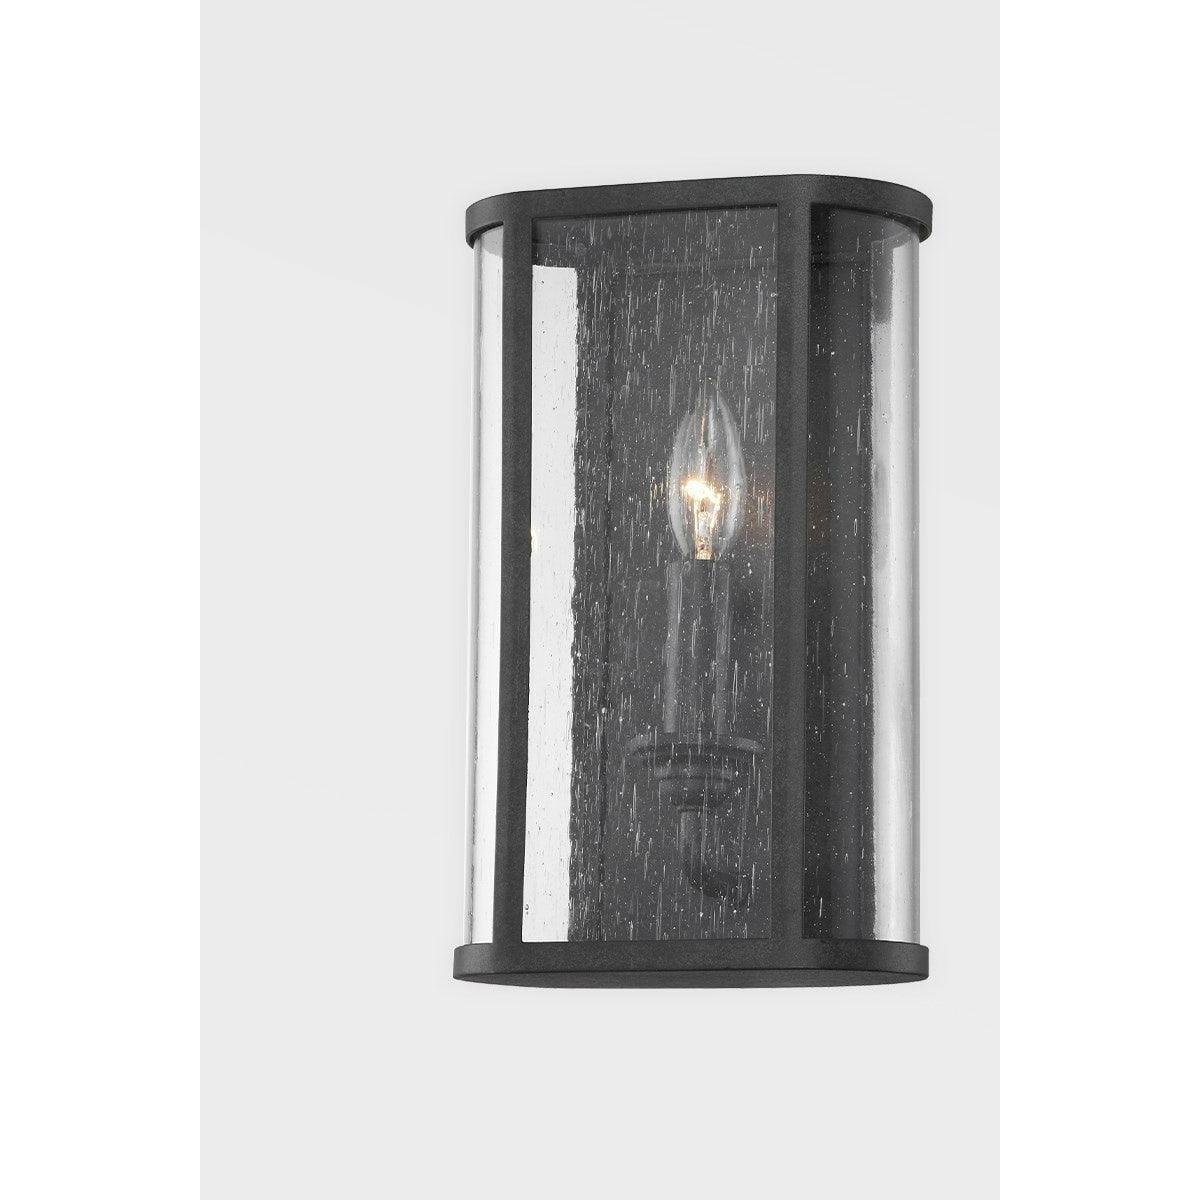 Troy Lighting - Chace Wall Sconce - B3401-FRN | Montreal Lighting & Hardware